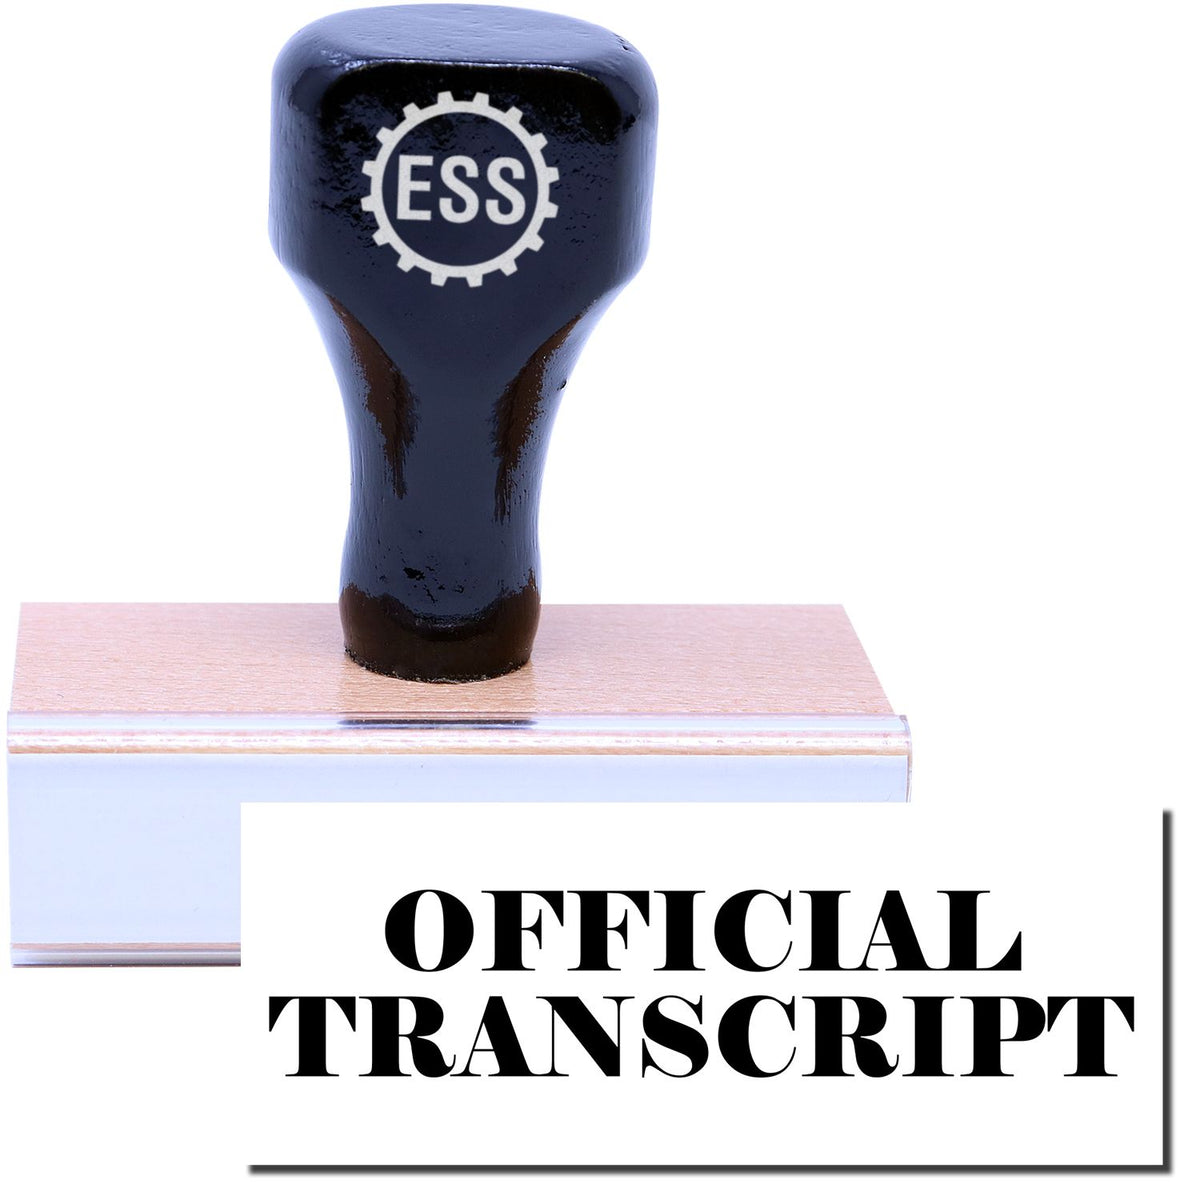 A stock office rubber stamp with a stamped image showing how the text &quot;OFFICIAL TRANSCRIPT&quot; is displayed after stamping.